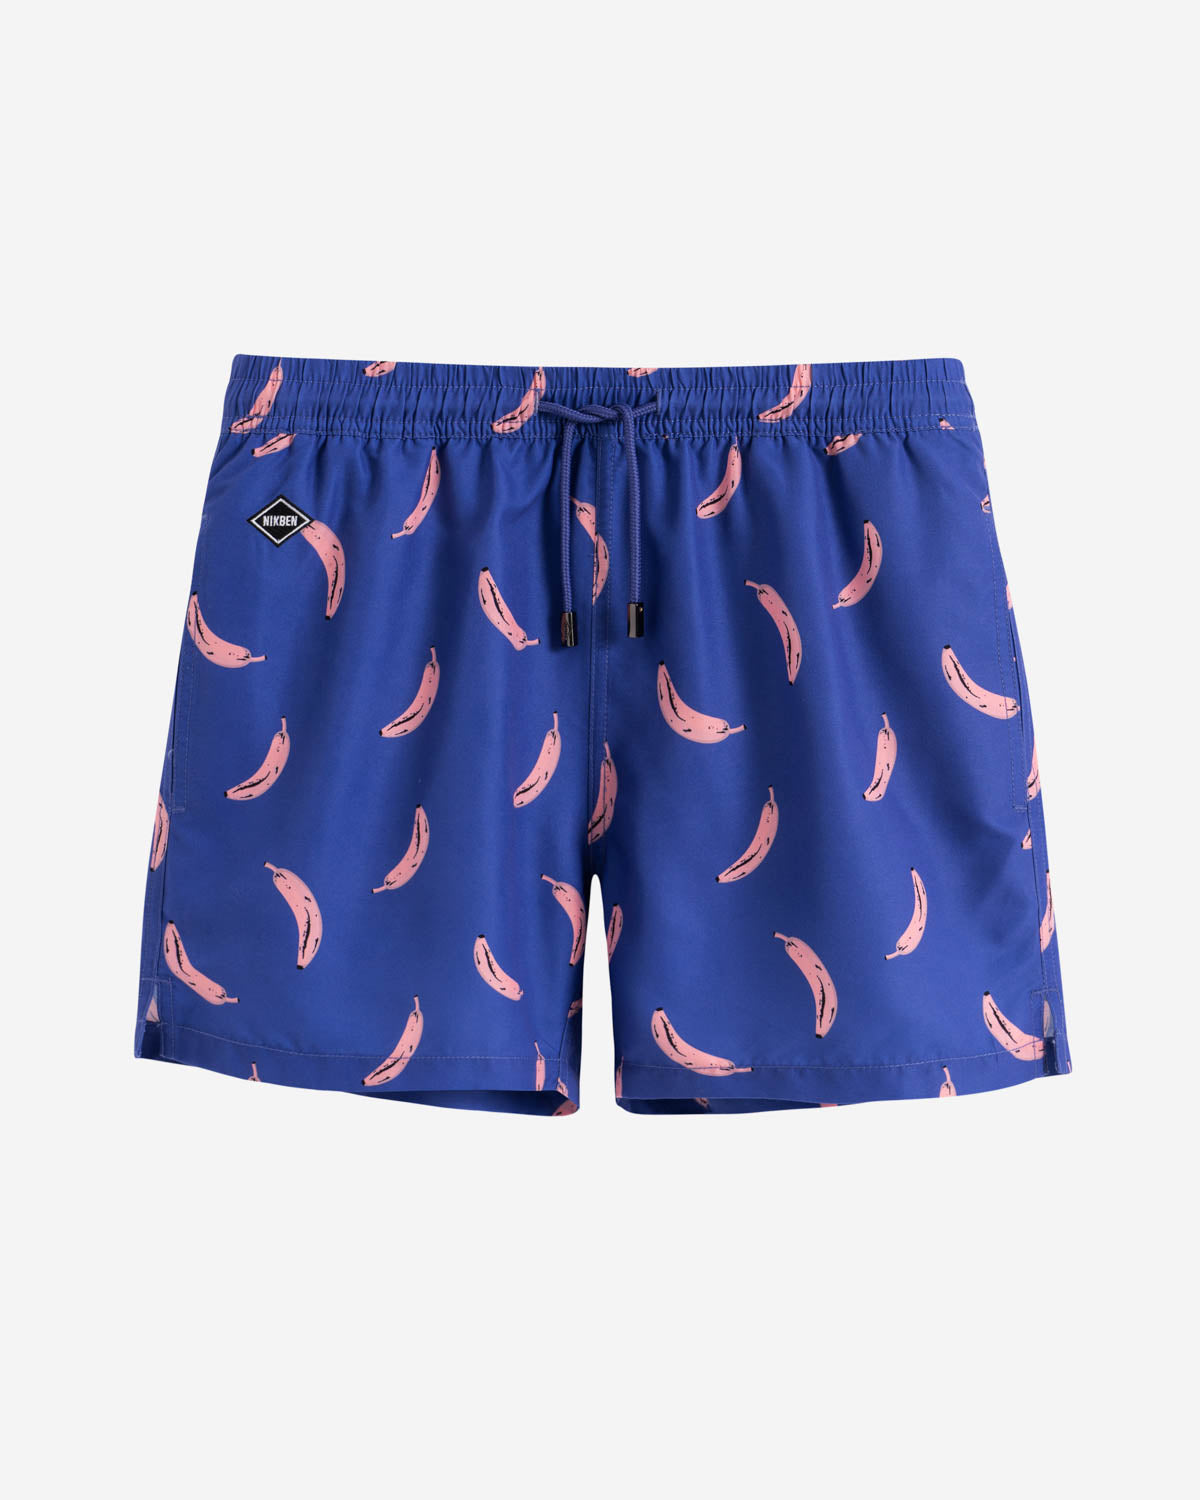 Purple swim trunks with pink banana print. Mid length shorts with drawstring waistband and two side pockets.